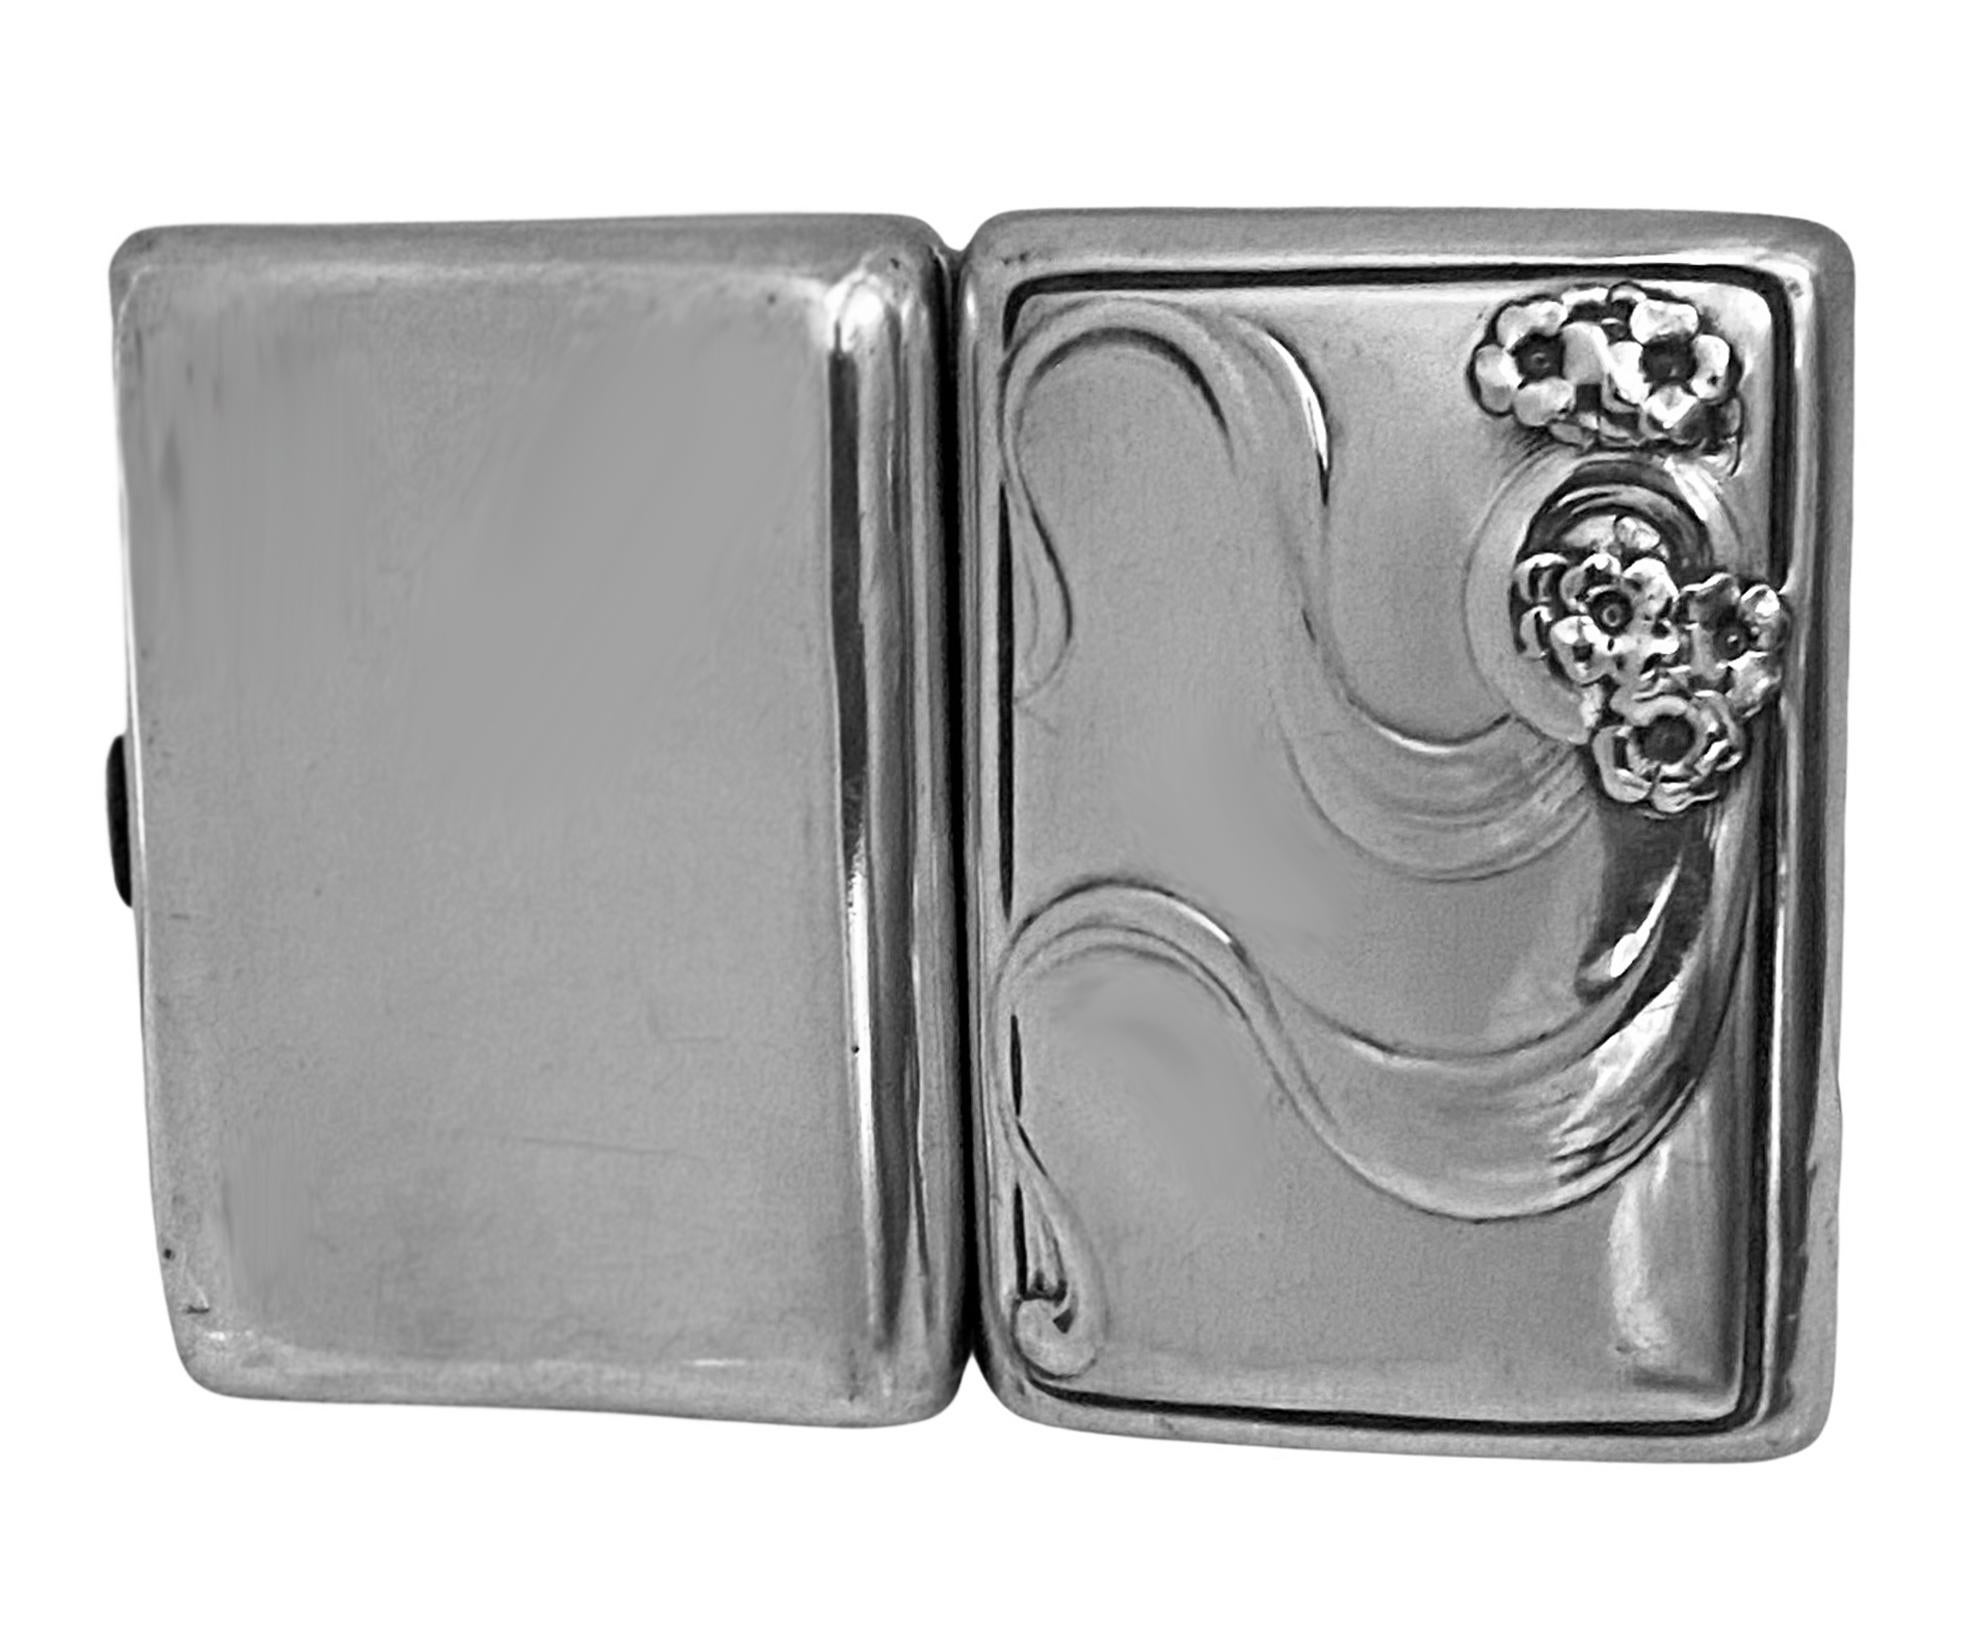 Art Nouveau sterling silver cigarette case London 1902, George Lawrence Connell. Rectangular concave form, the front with art nouveau stylised decoration in relief, interior lightly gilded. Hallmarked inside both cover and and back and thumbpiece.